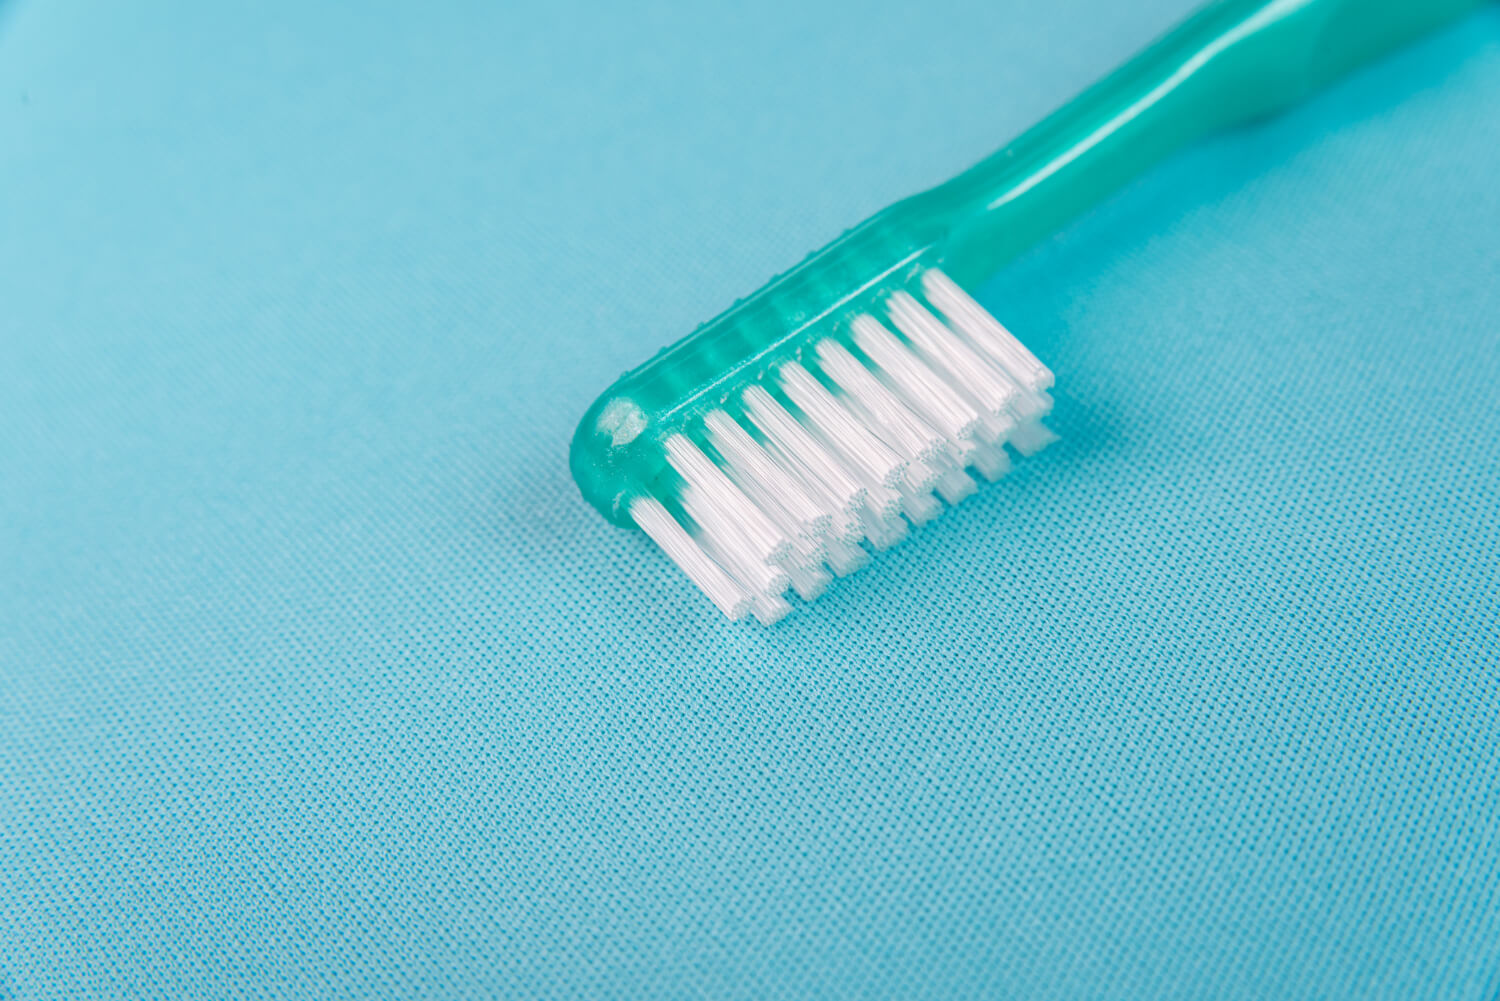 A captivating photo of a turquoise toothbrush, symbolizing the vibrant care you can give your smile.